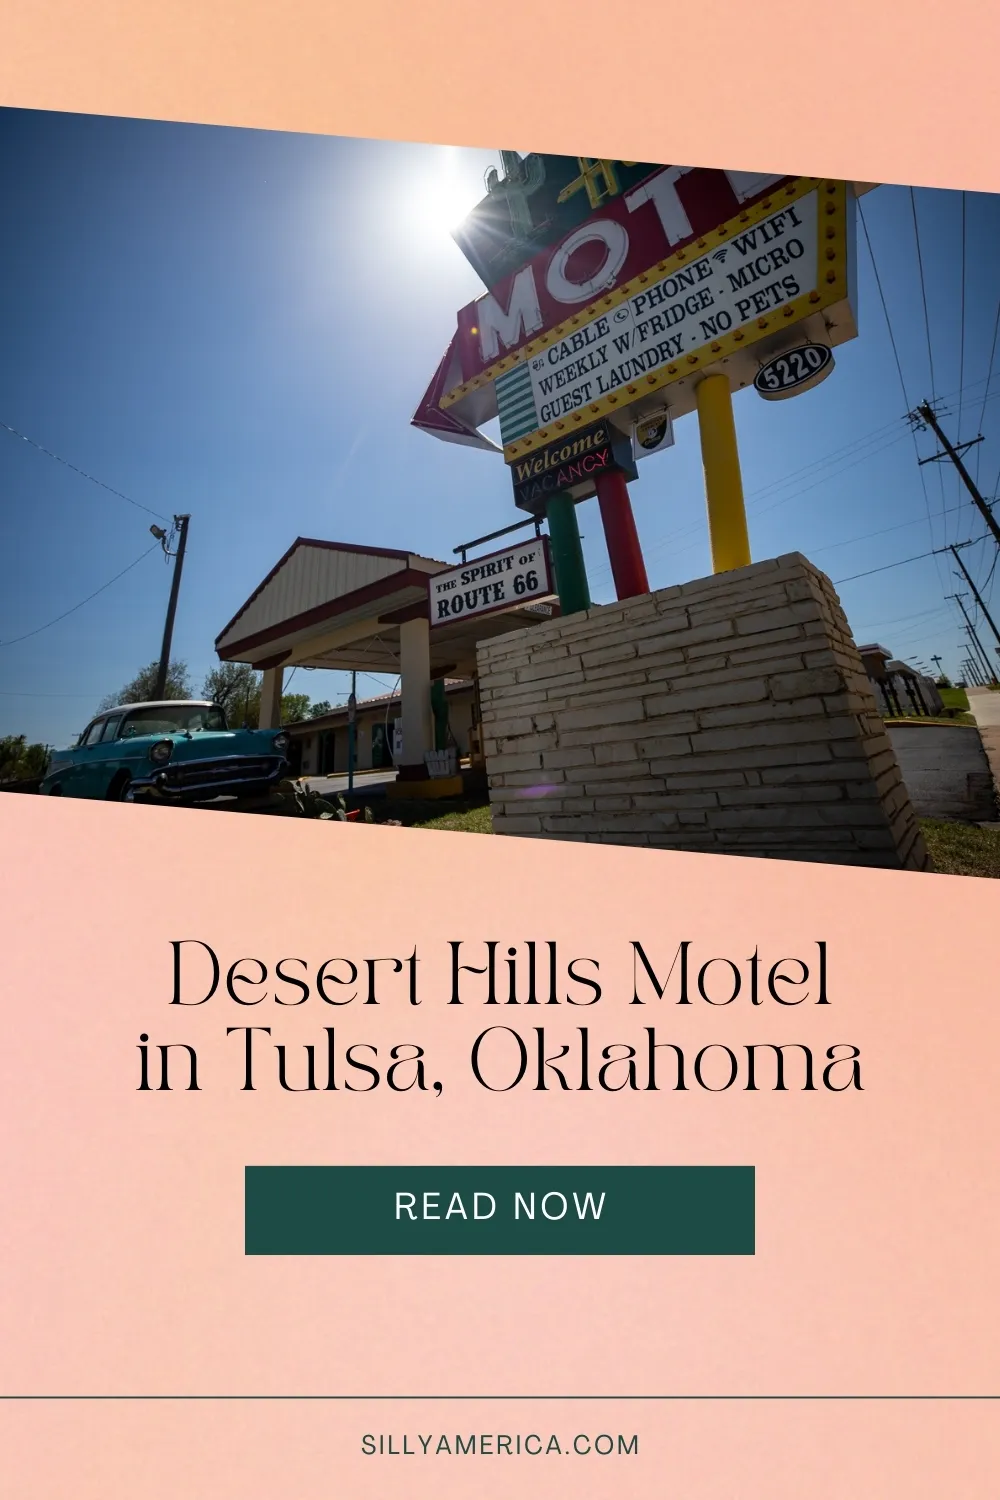 Desert Hills Motel in Tulsa, Oklahoma has been serving Route 66 travelers since 1953. The budget-friendly Route 66 motel features 50 rooms lined up diagonally. Located close to downtown Tulsa, find this motel right on Oklahoma Route 66. Look for the big neon sign lit up with a glowing green cactus (renovated in 2004 for the International Tulsa Route 66 Festival) and the vintage blue automobile out front. #Route66 #Route66ROadTrip #Oklahoma #Motel #RoadTrip #RoadTripMotel #OklahomaROadTrip